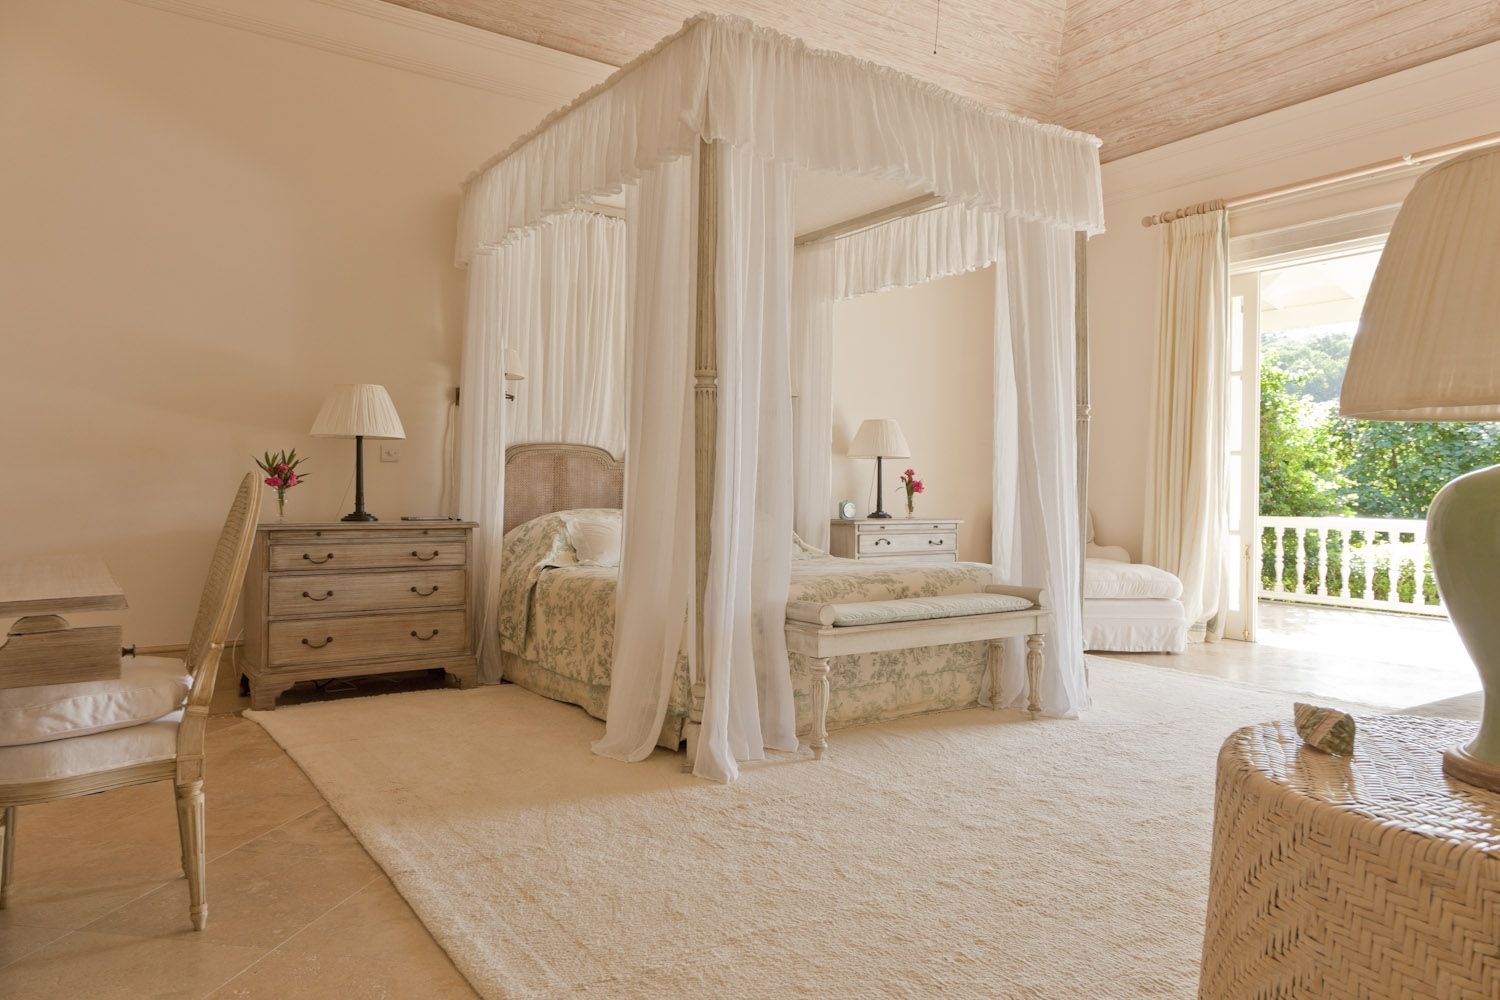 Double bedroom of Plantation House, Mustique